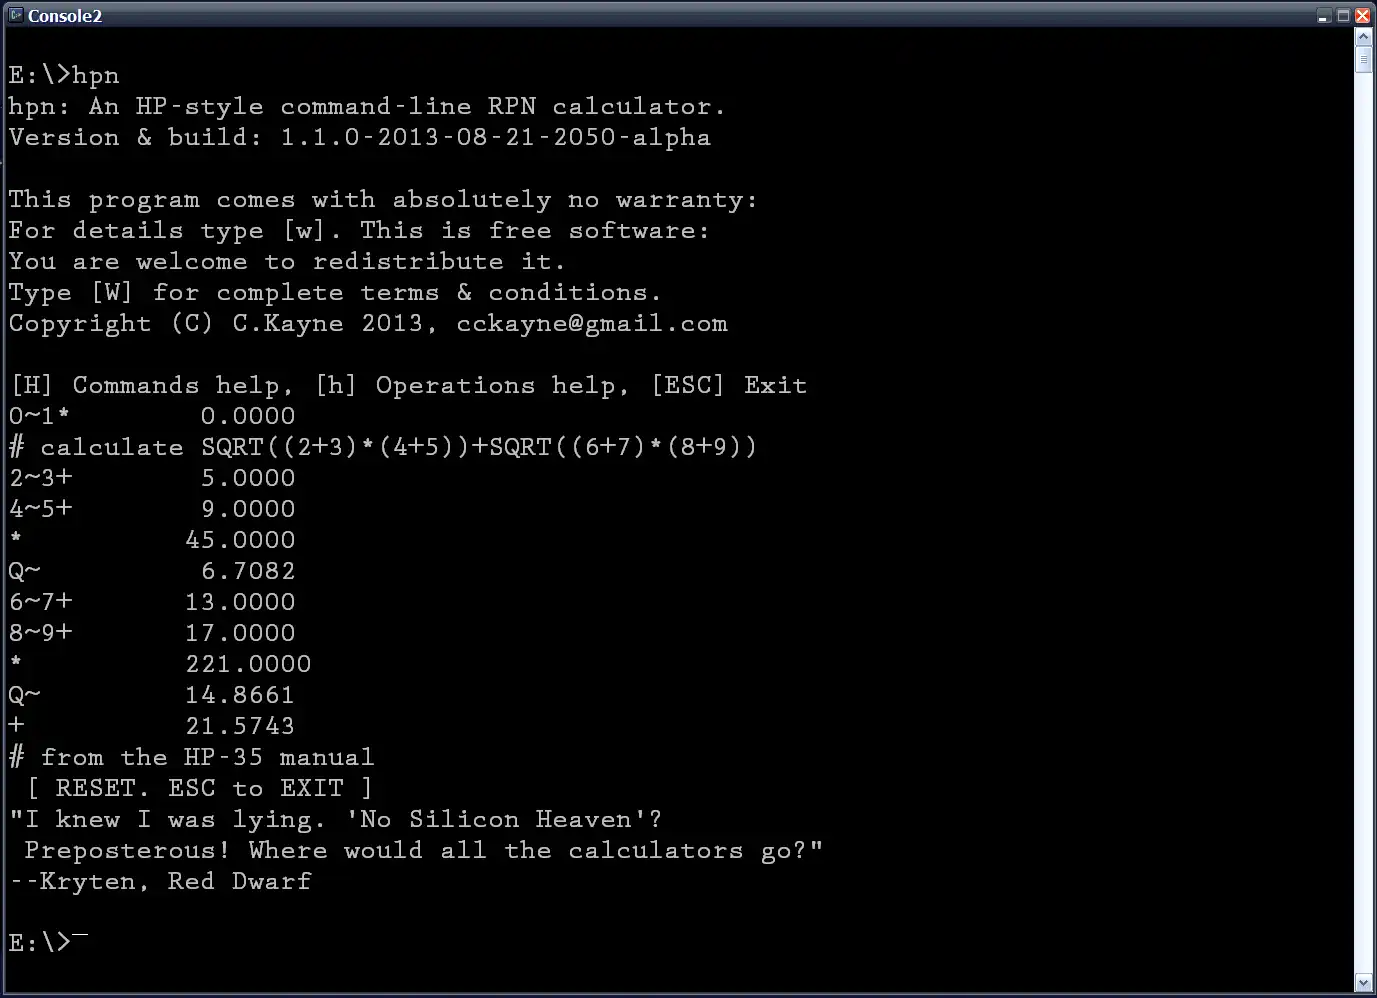 Download web tool or web app HPN cli calculator to run in Linux online